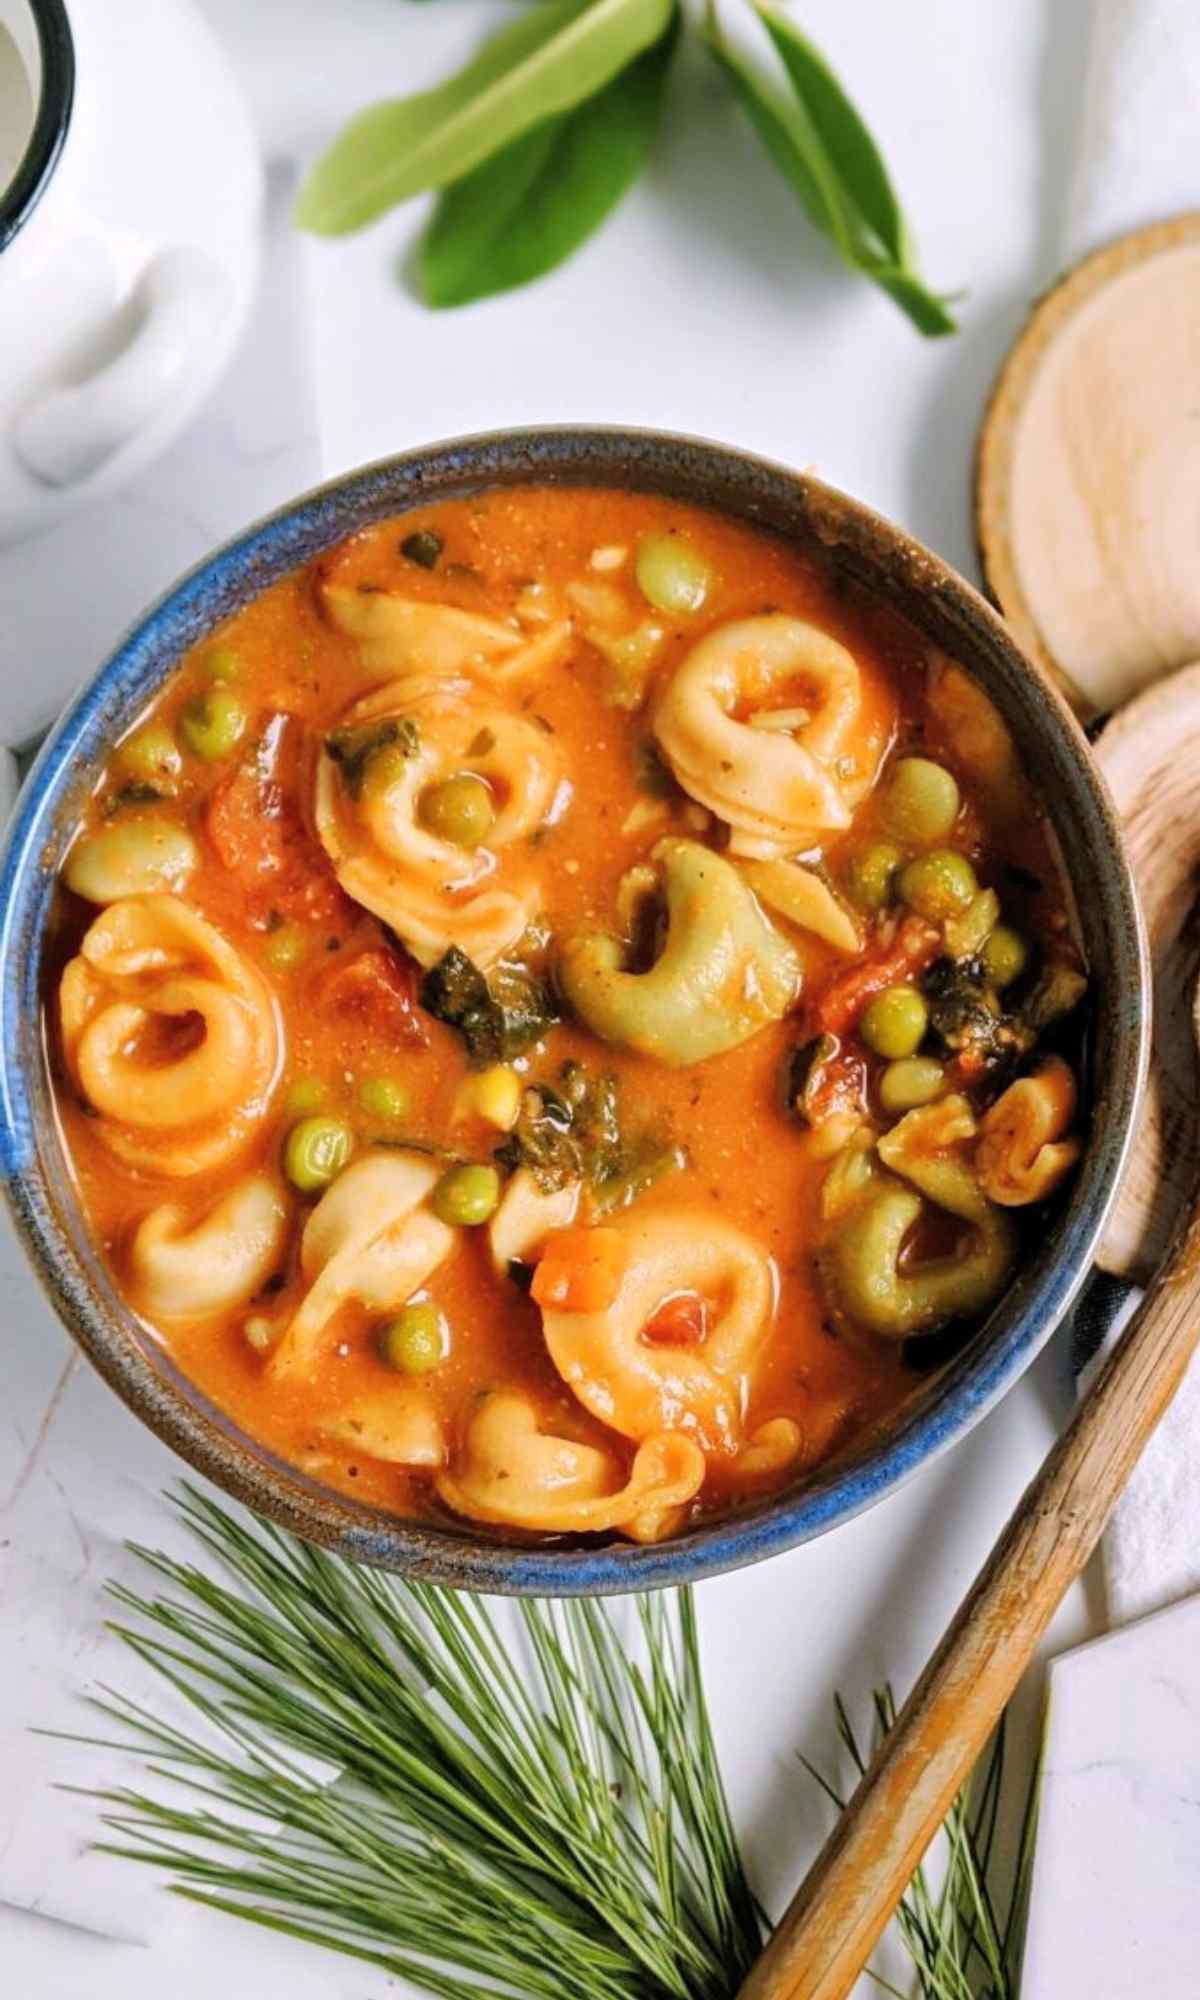 spinach tomato tortellini soup recipe with frozen mixed vegetables vegetarian tortellini recipes for lunch or dinner in a blue bowl with pine needles and a wooden spoon